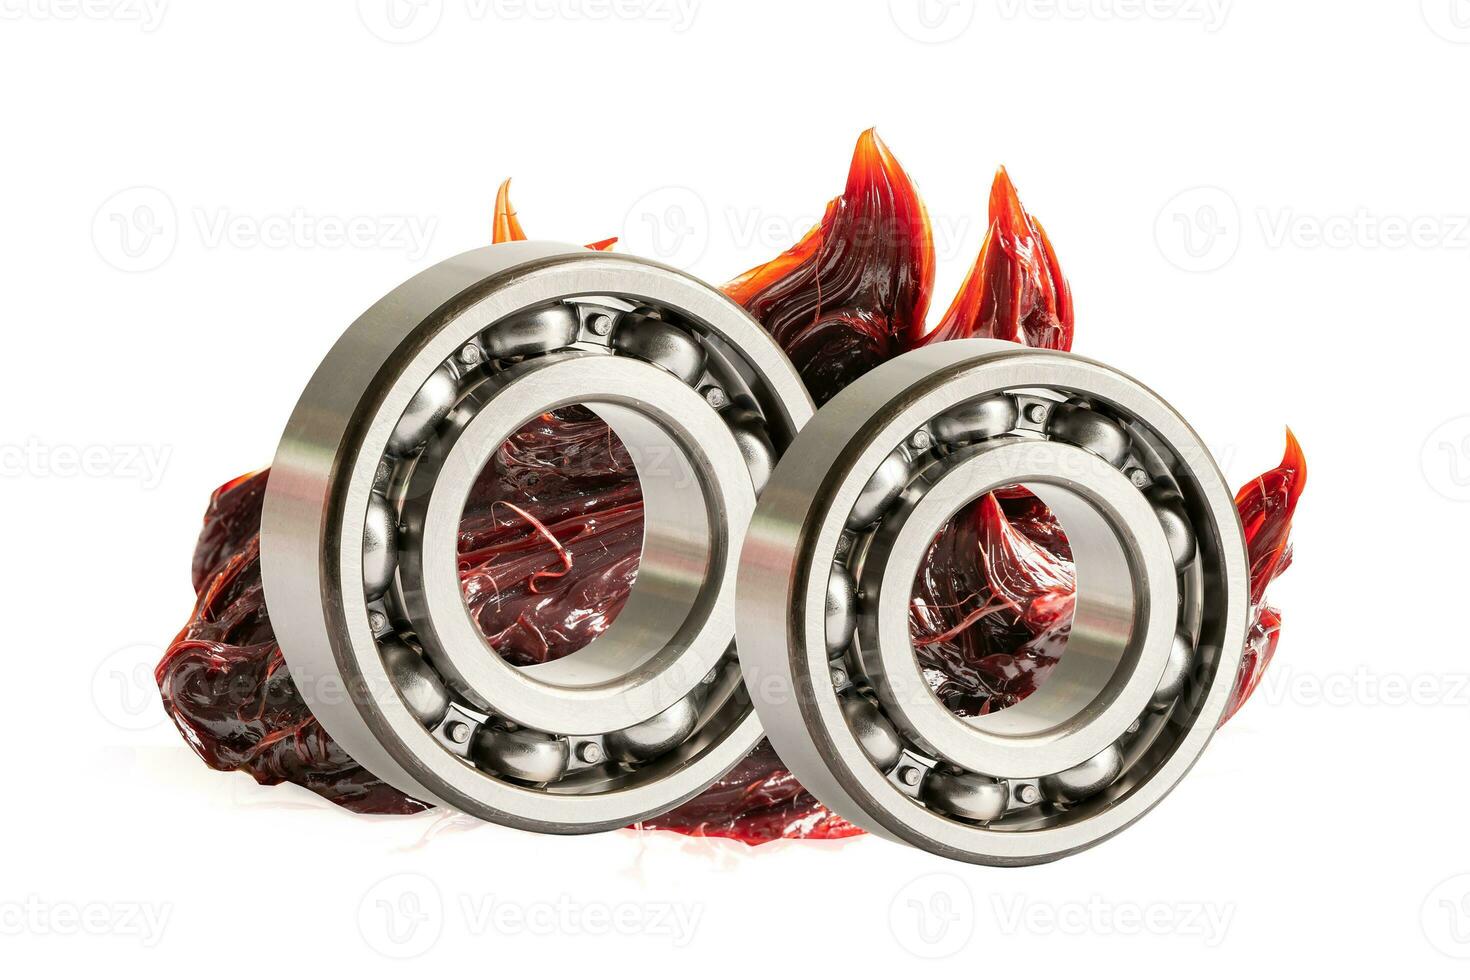 Ball bearing stainless with grease, red excellent water resistance synthetic lithium complex grease for moving path and machinery lubrication for automotive and industrial. photo